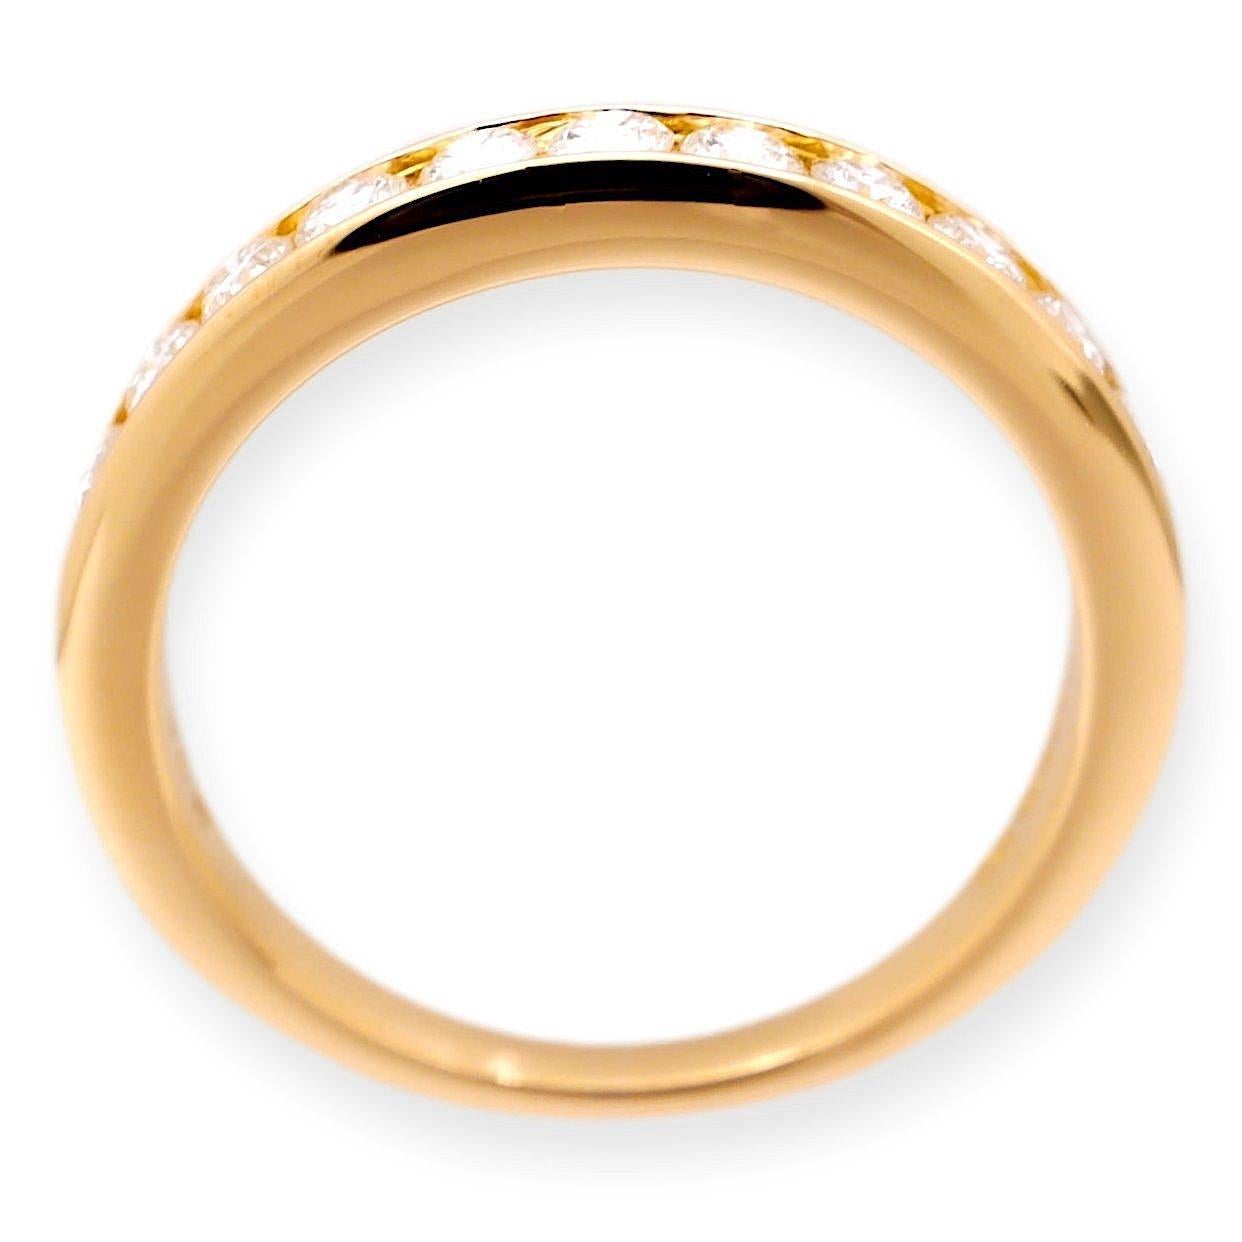 Tiffany & Co. 18K Yellow Gold 3mm Halfway 0.33 cts Wedding Band Ring In Excellent Condition For Sale In New York, NY